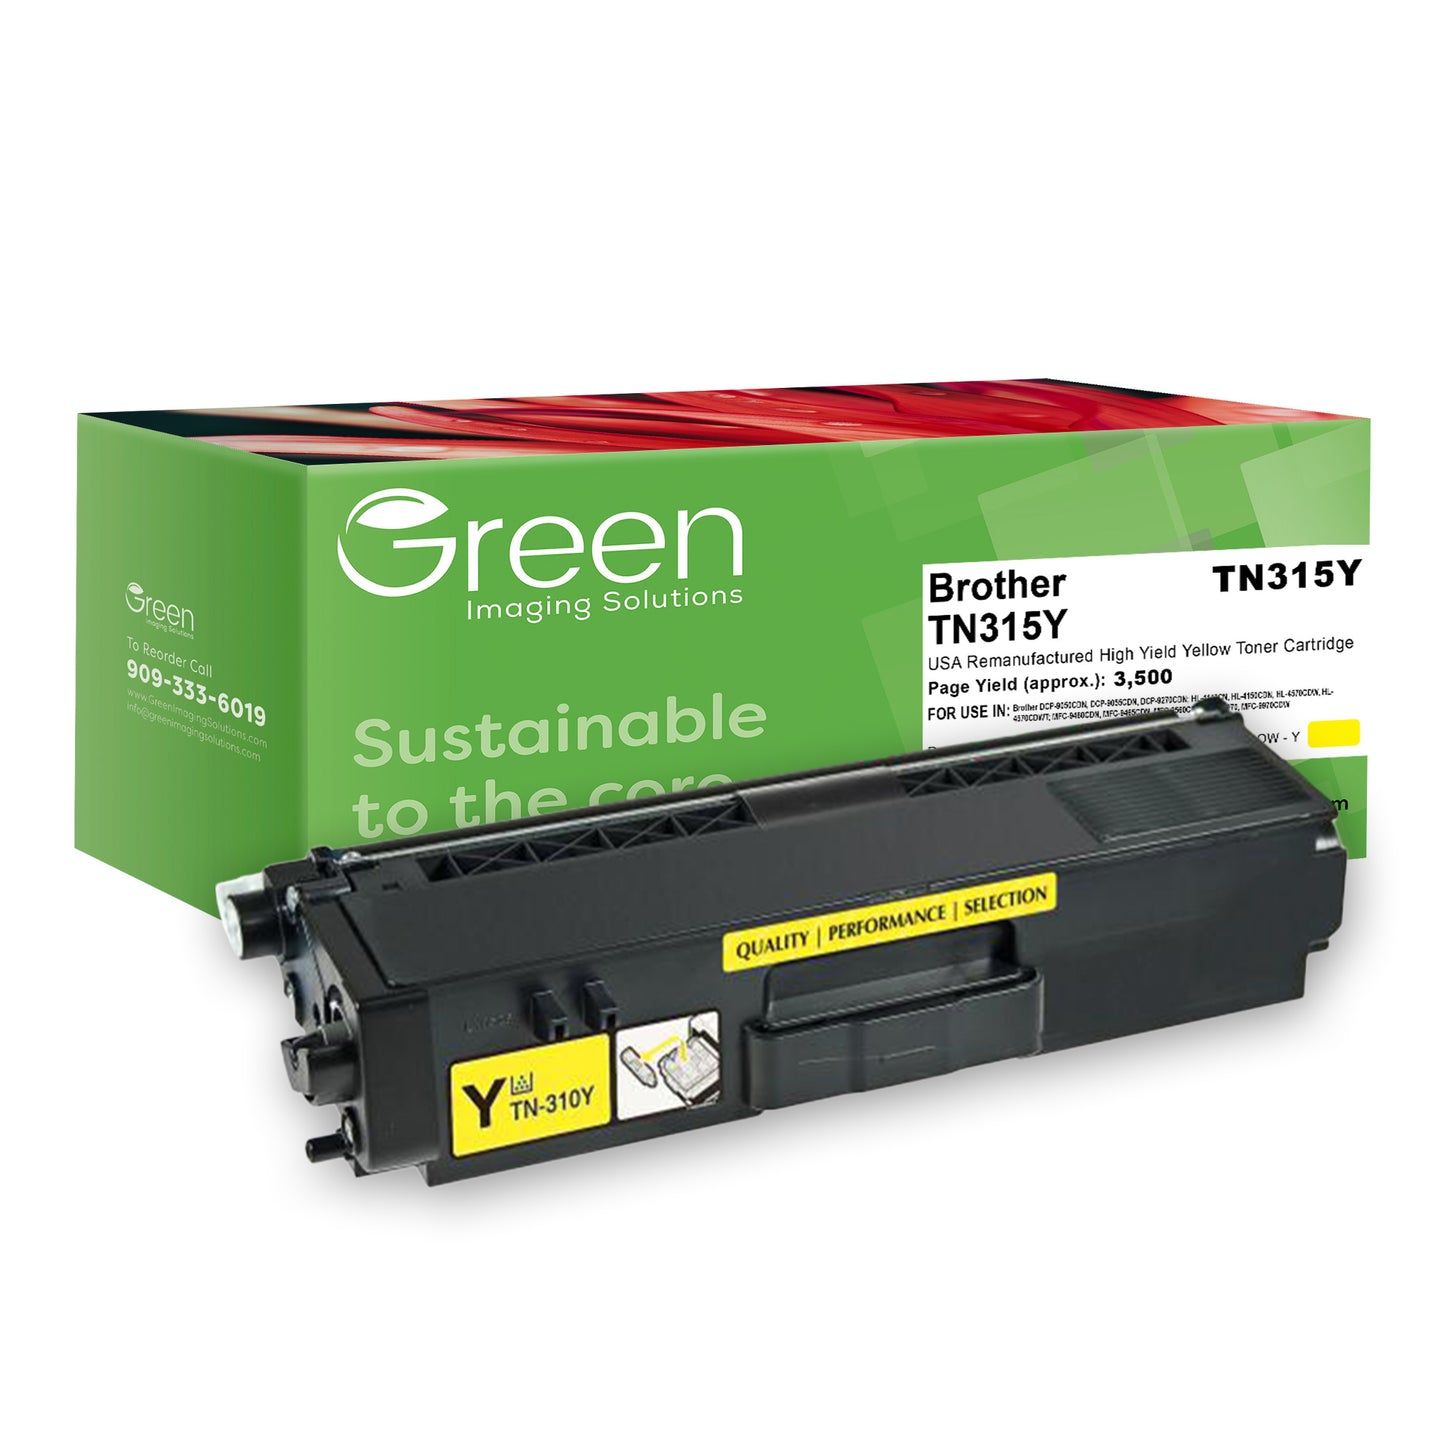 Green Imaging Solutions USA Remanufactured High Yield Yellow Toner Cartridge for Brother TN315